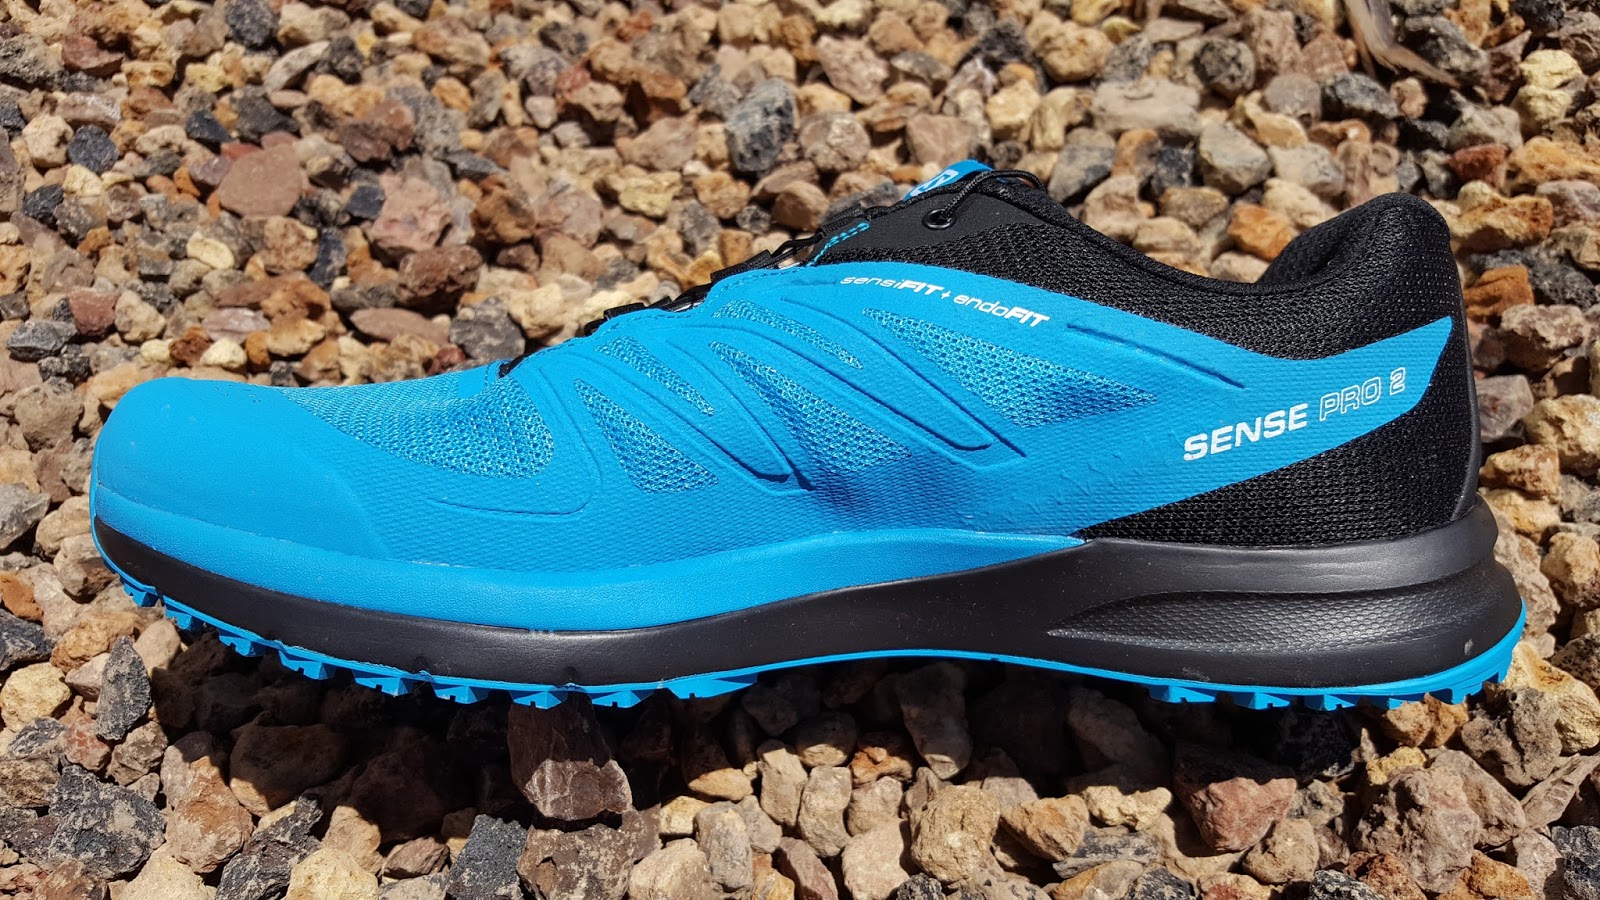 Running Without Injuries: Salomon Sense Pro-2 and Park Shirt Review